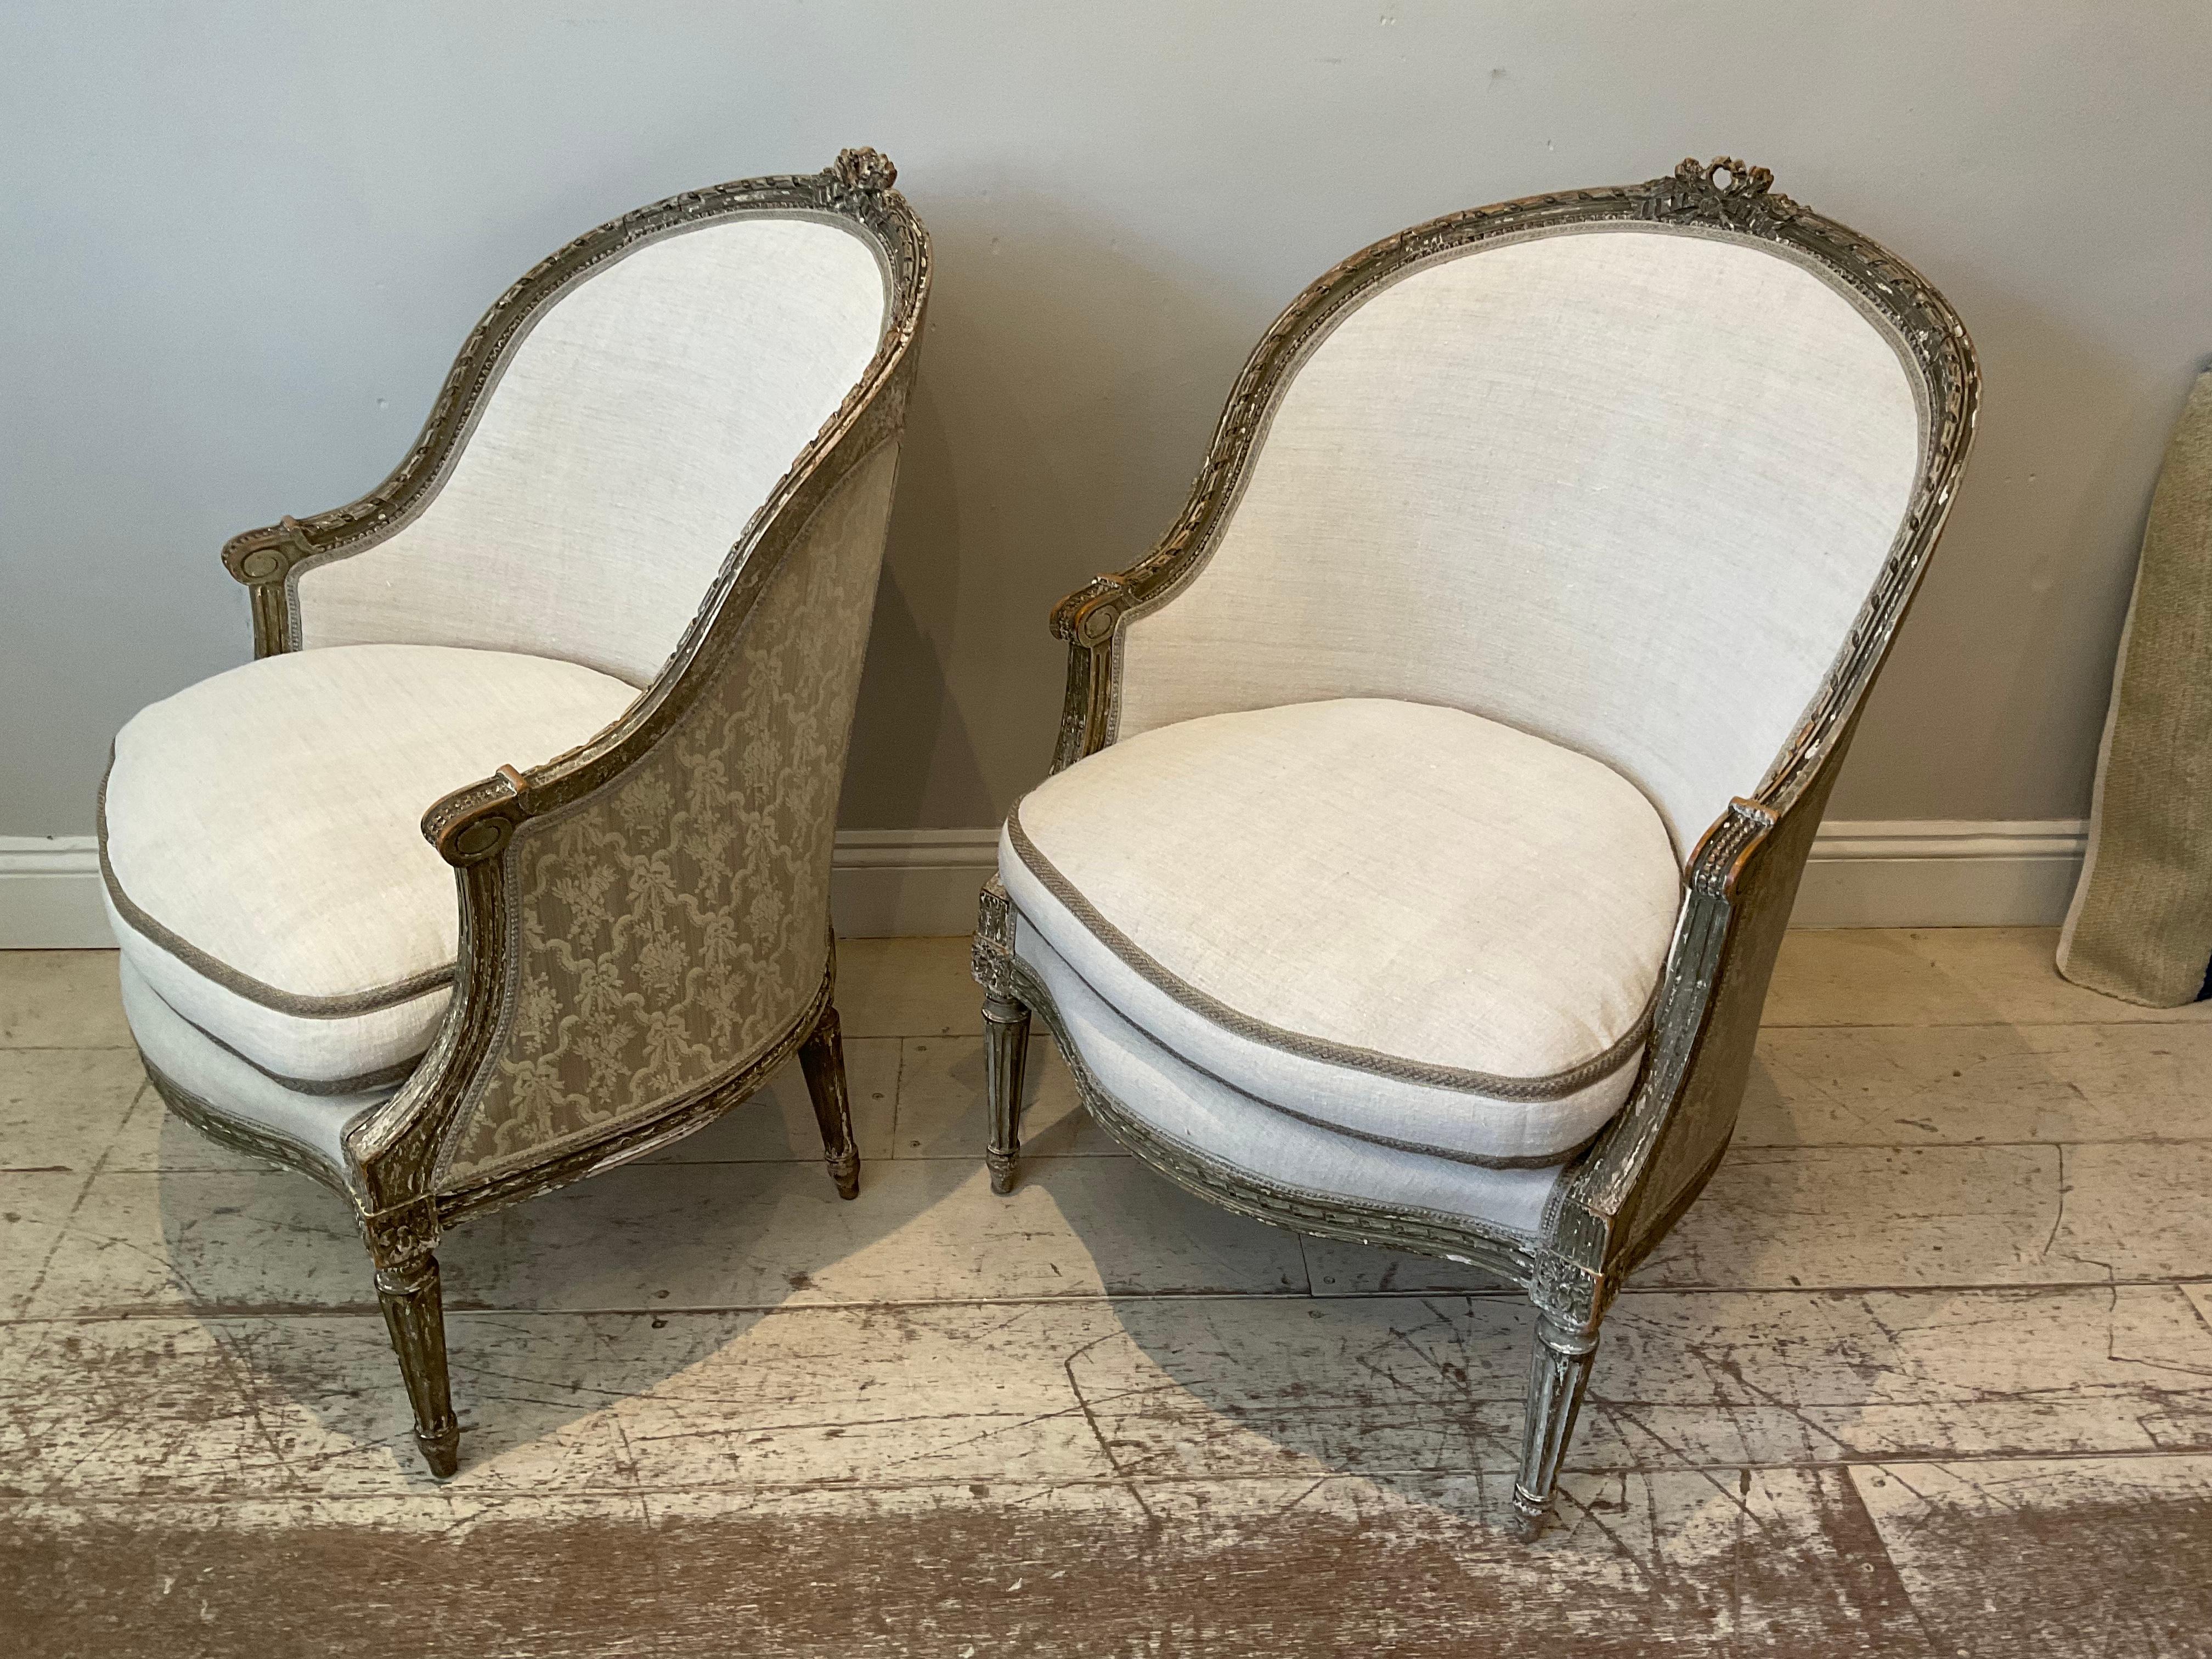 Carved Pair of 1920s Swedish Painted Armchairs Upholstered in French Linen